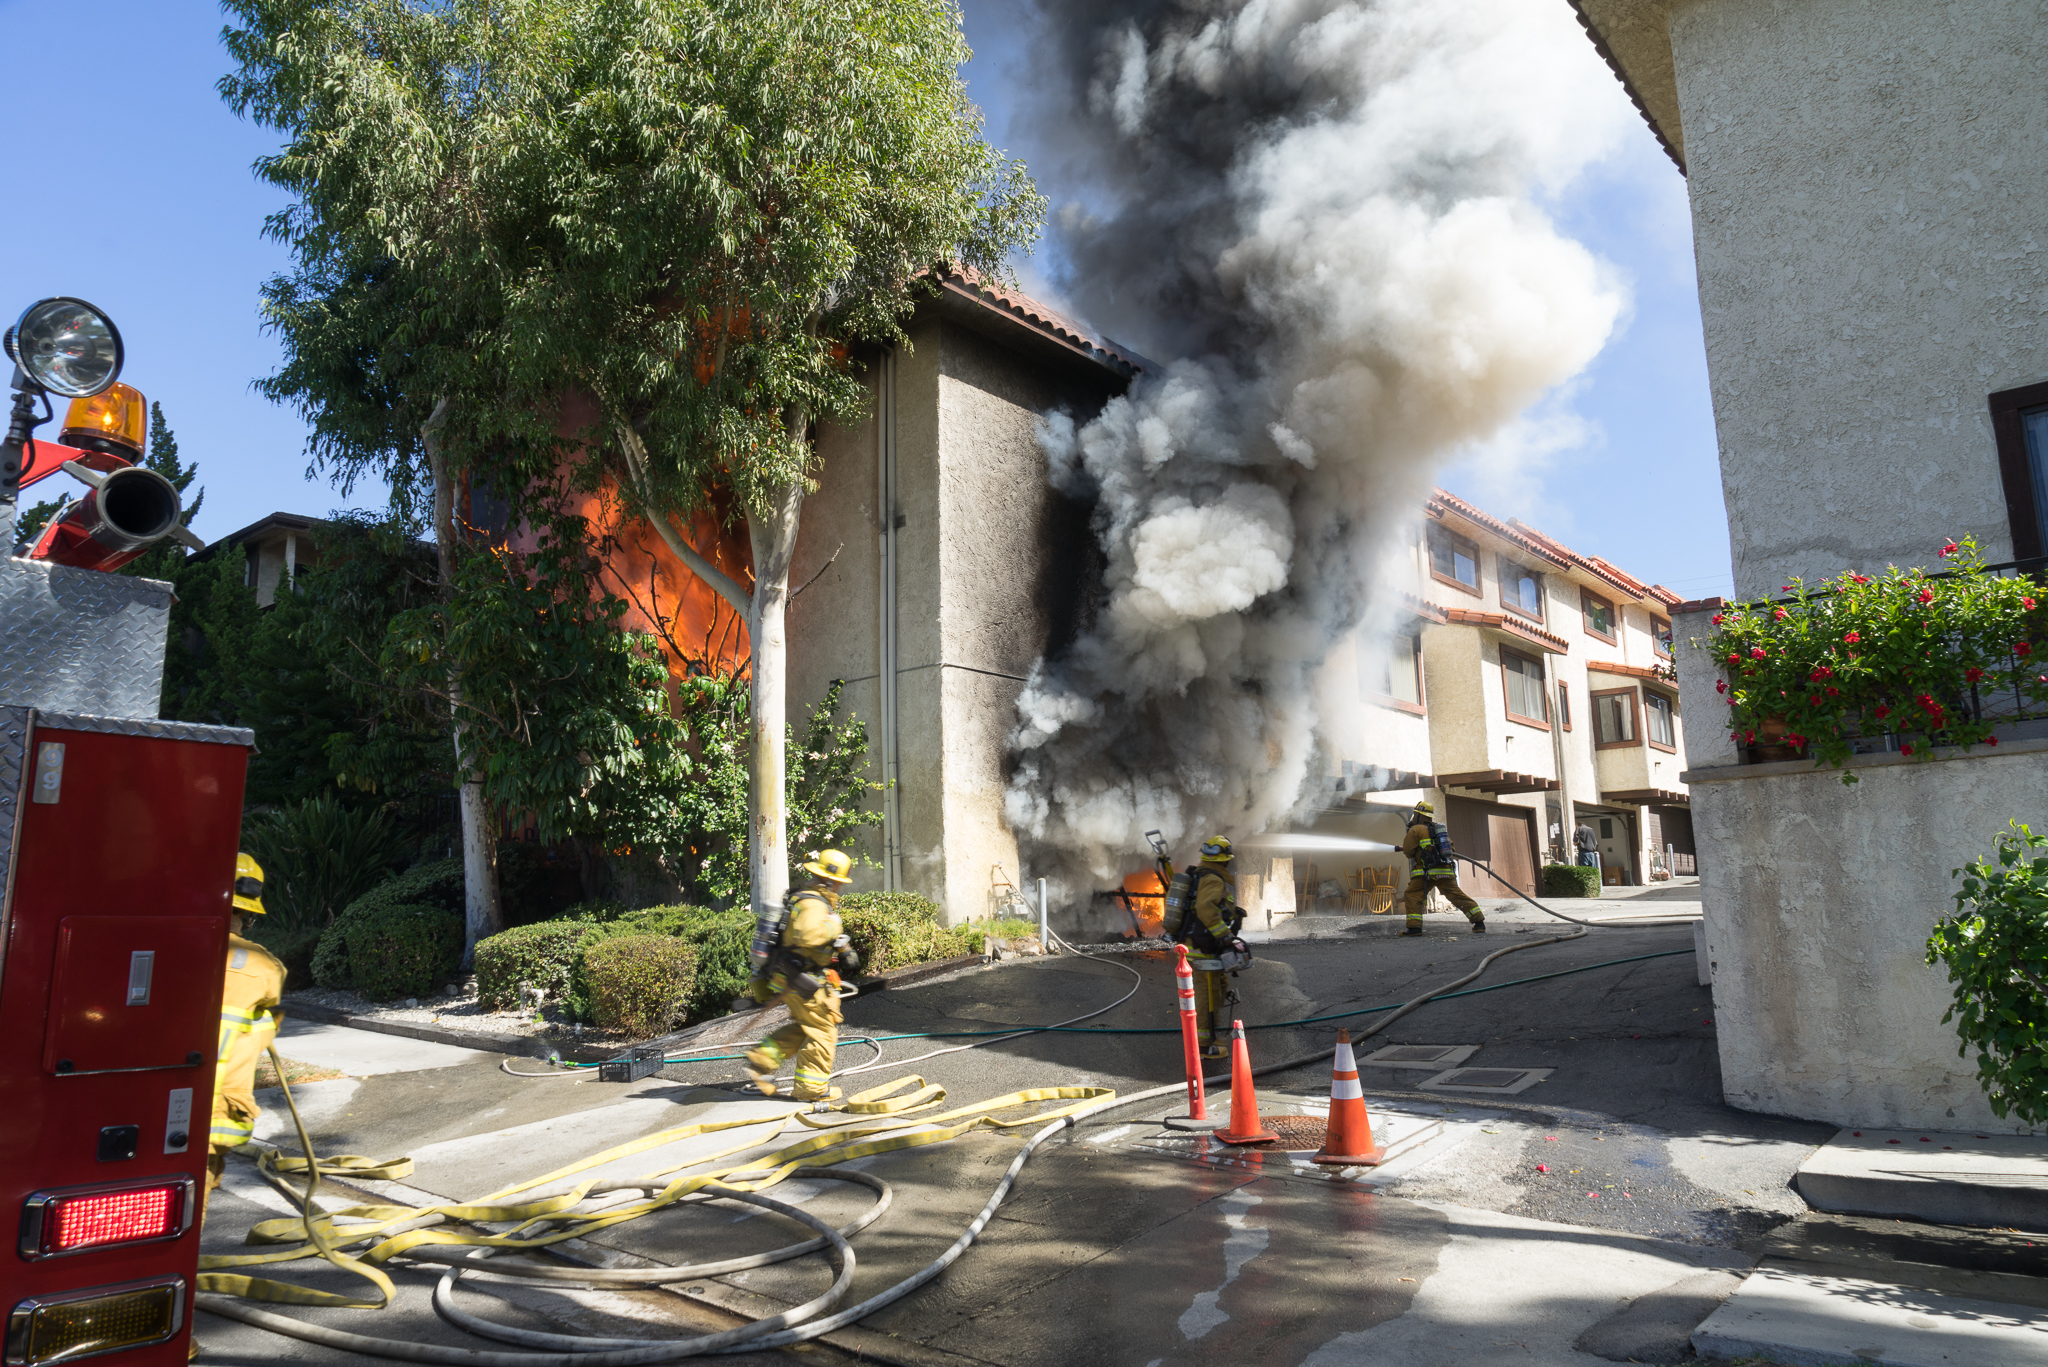 Exterior view of 2 story townhouse with fire showing